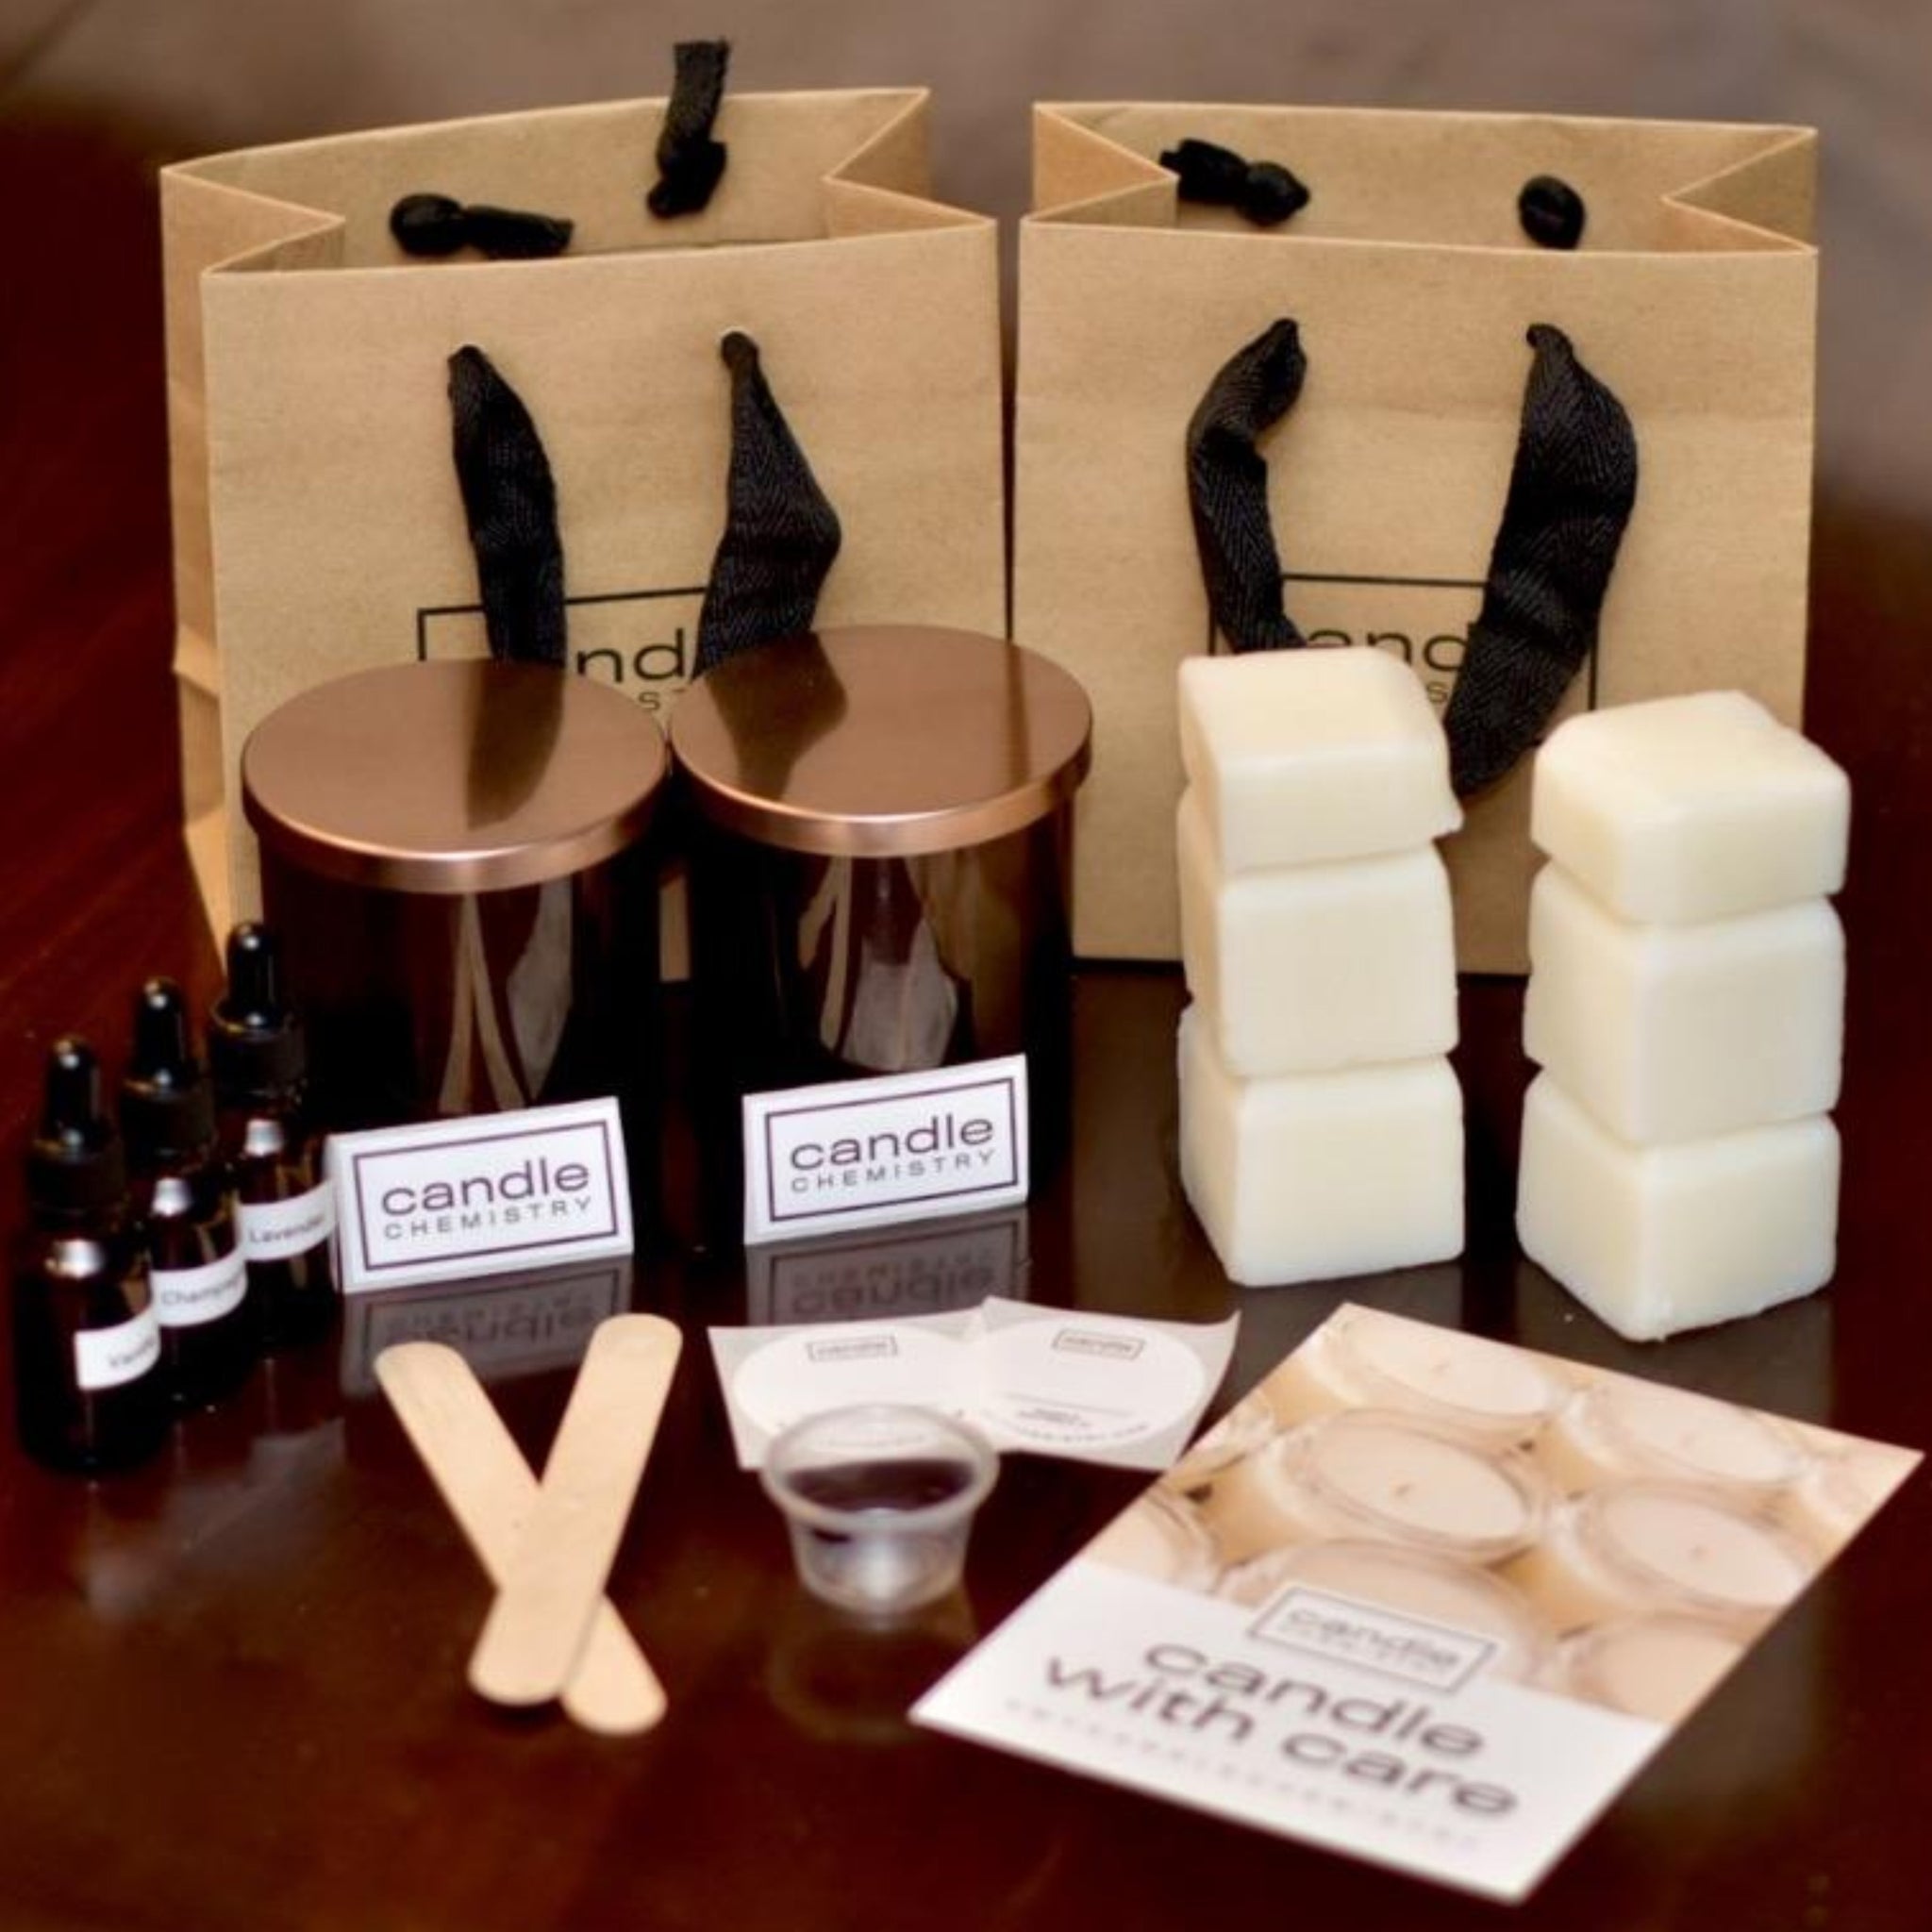 Designer Fragrances Container Candle Making Kit - Make Your Own Candles